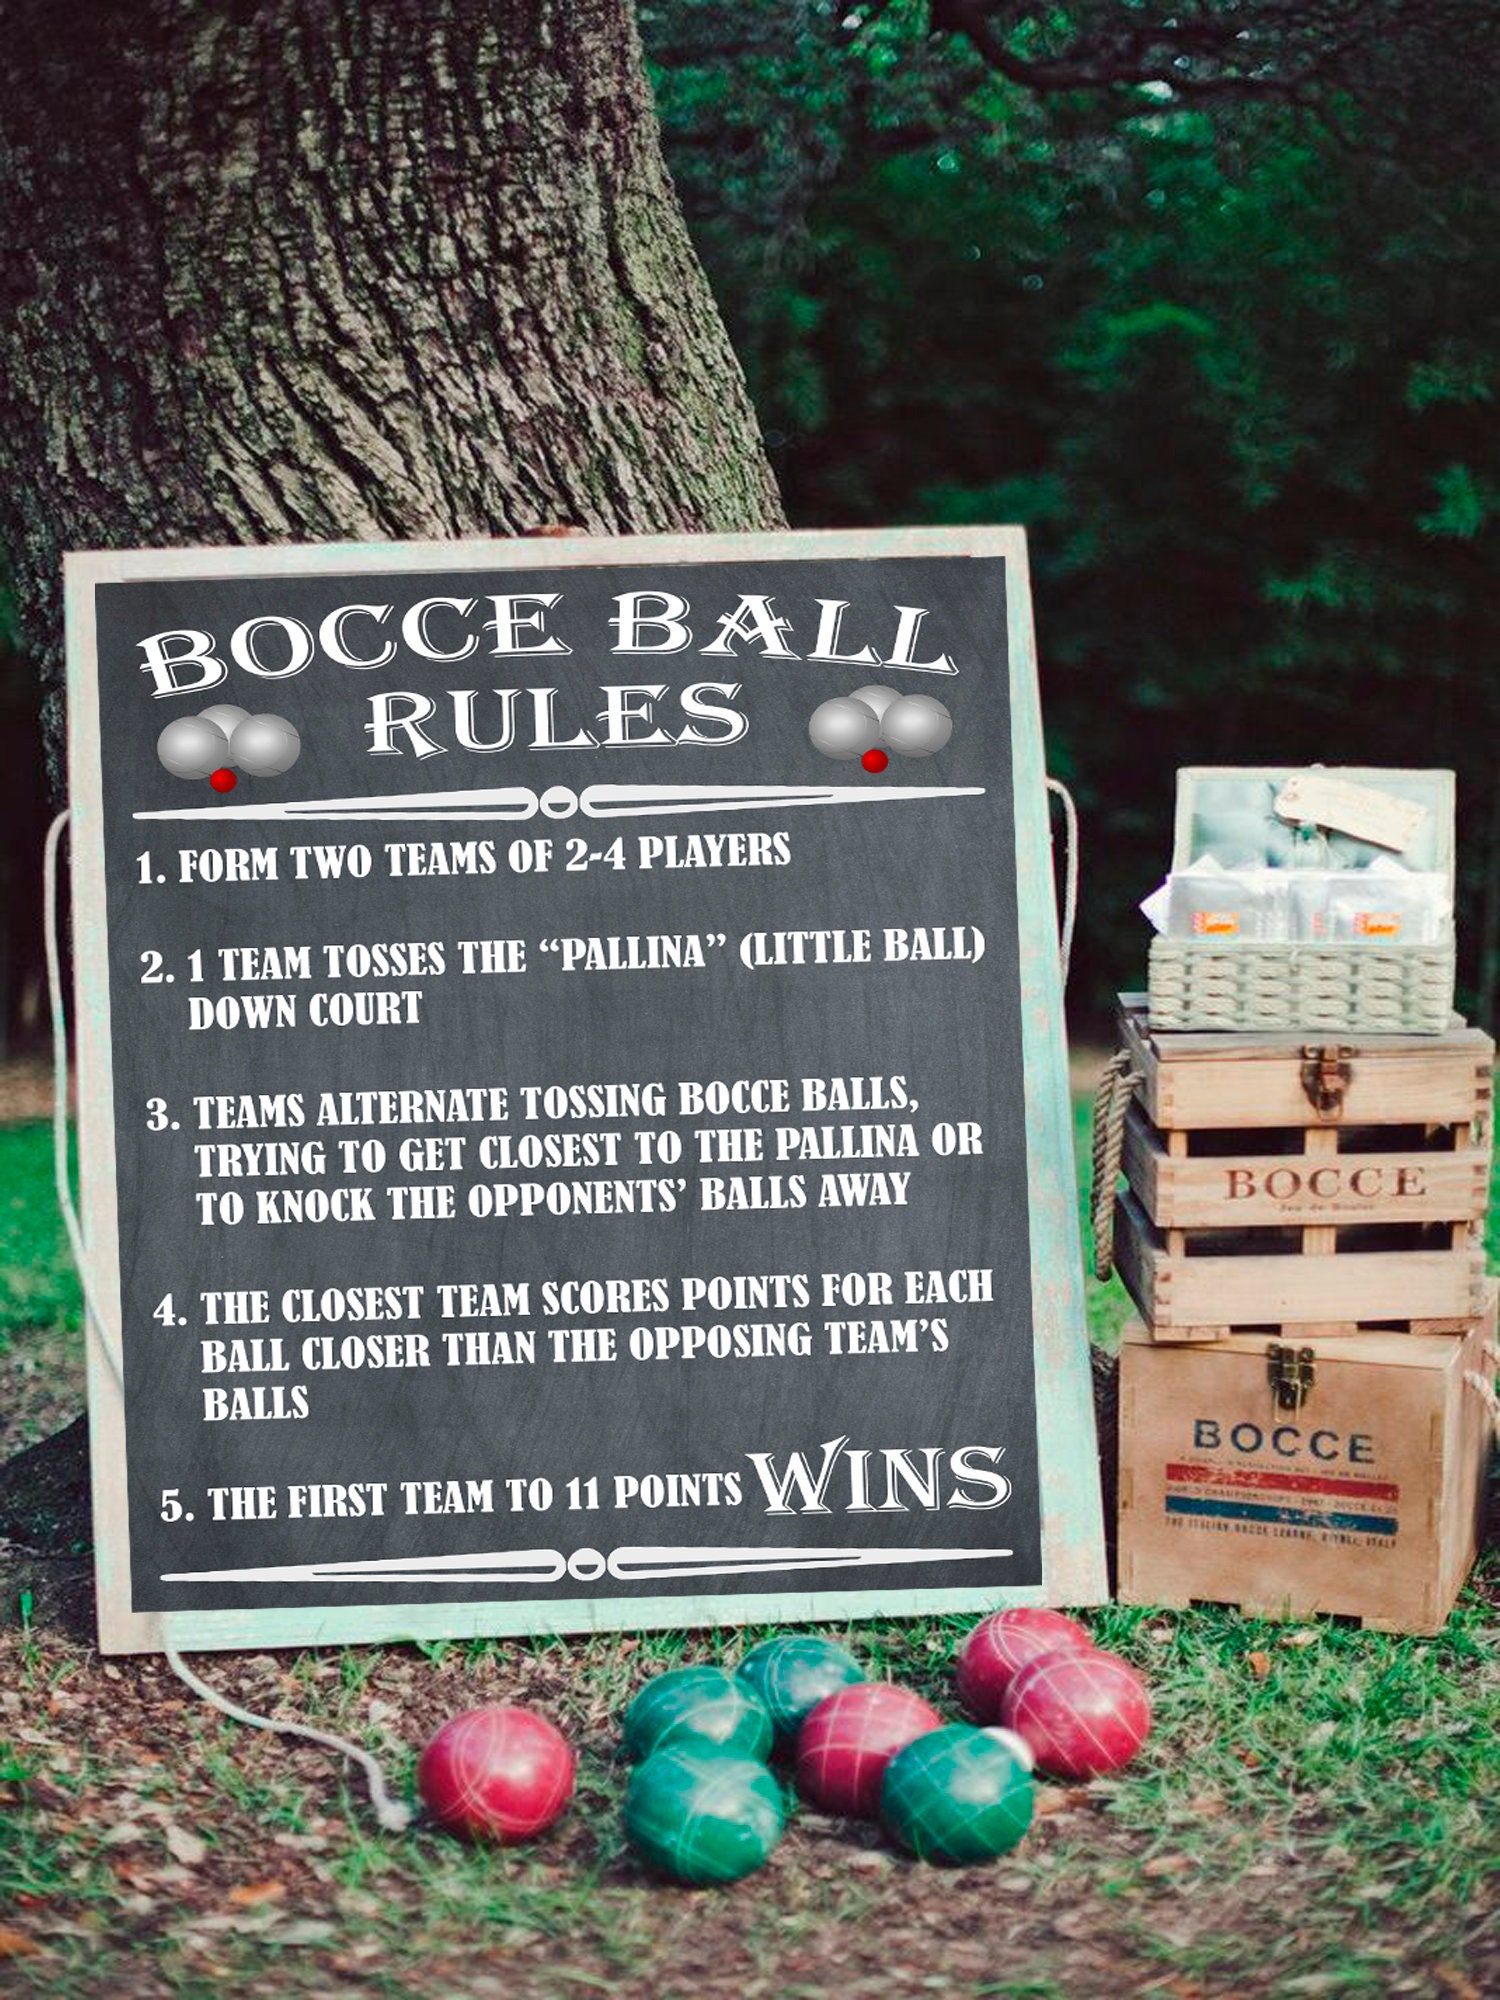 A completed bocce ball court with additional features